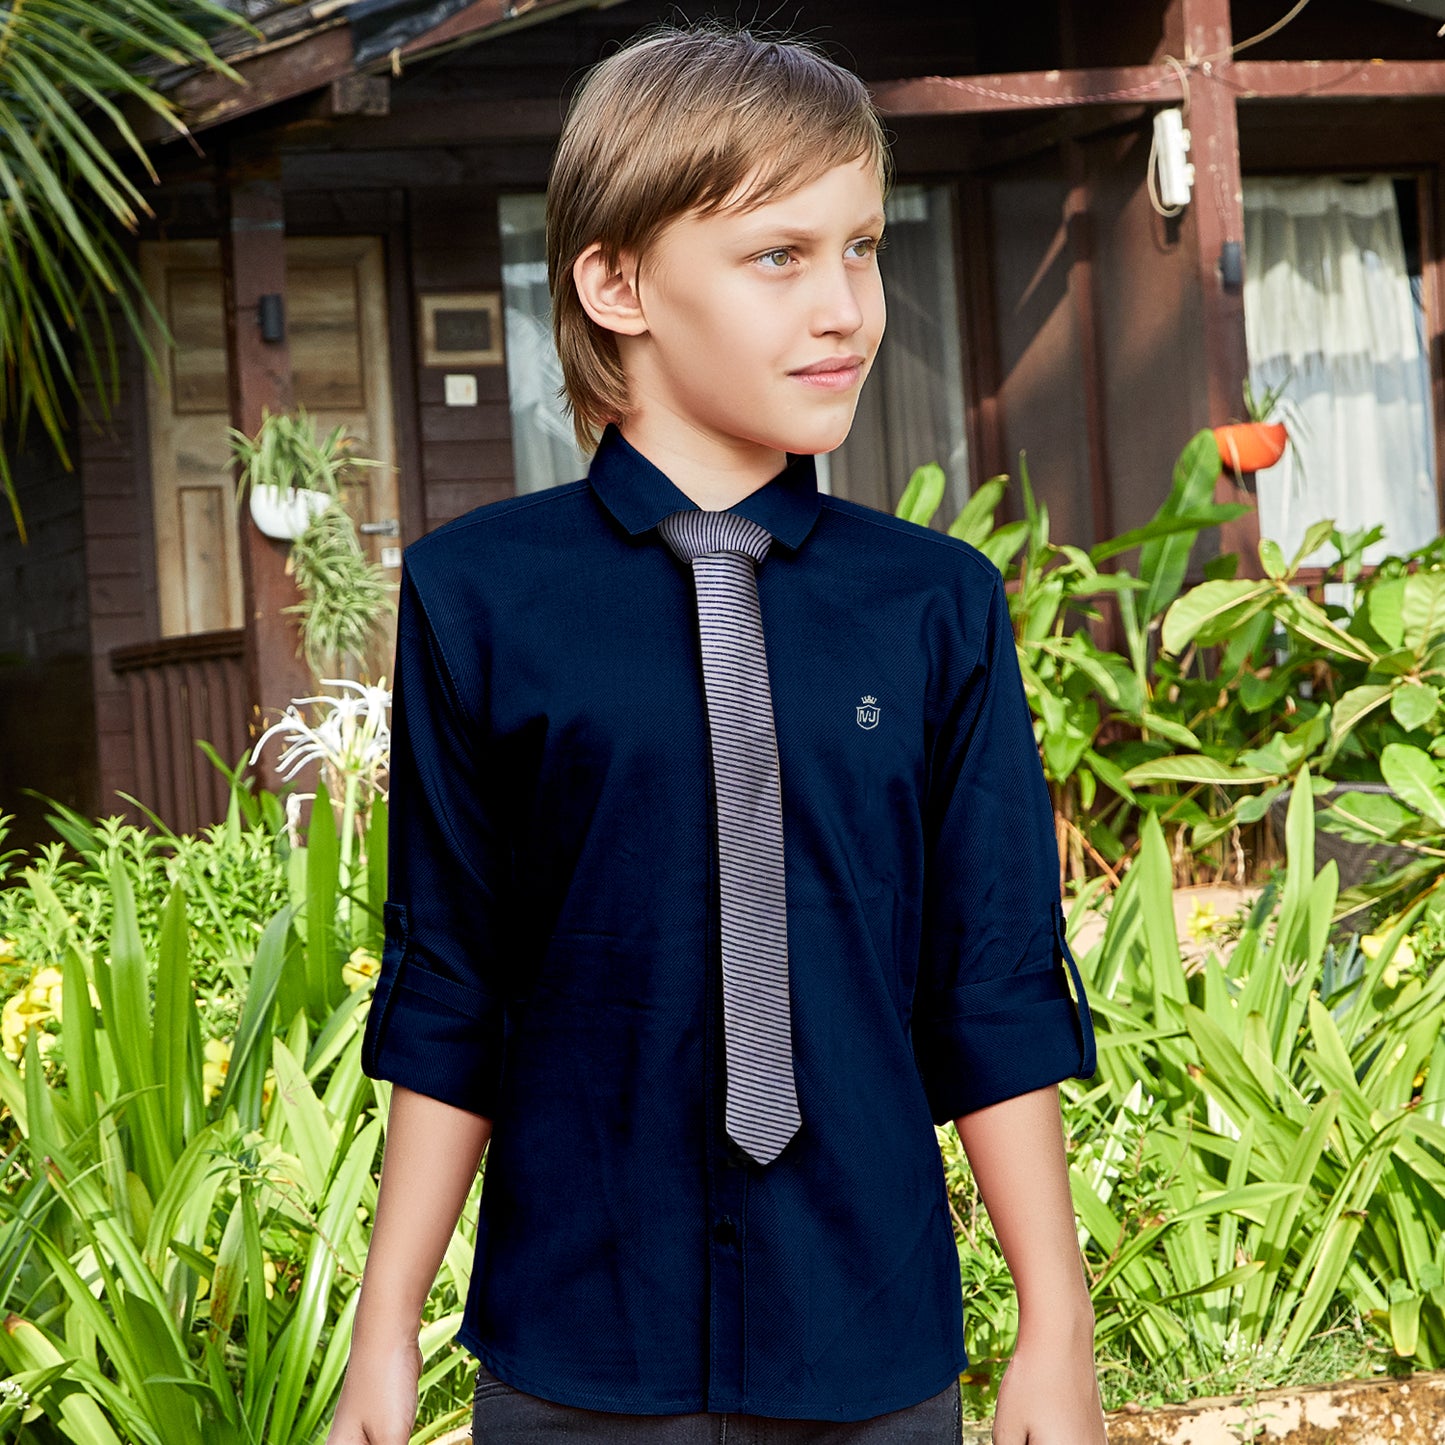 Tied to Perfection: Shirt + Tie Combo for Party Elegance!